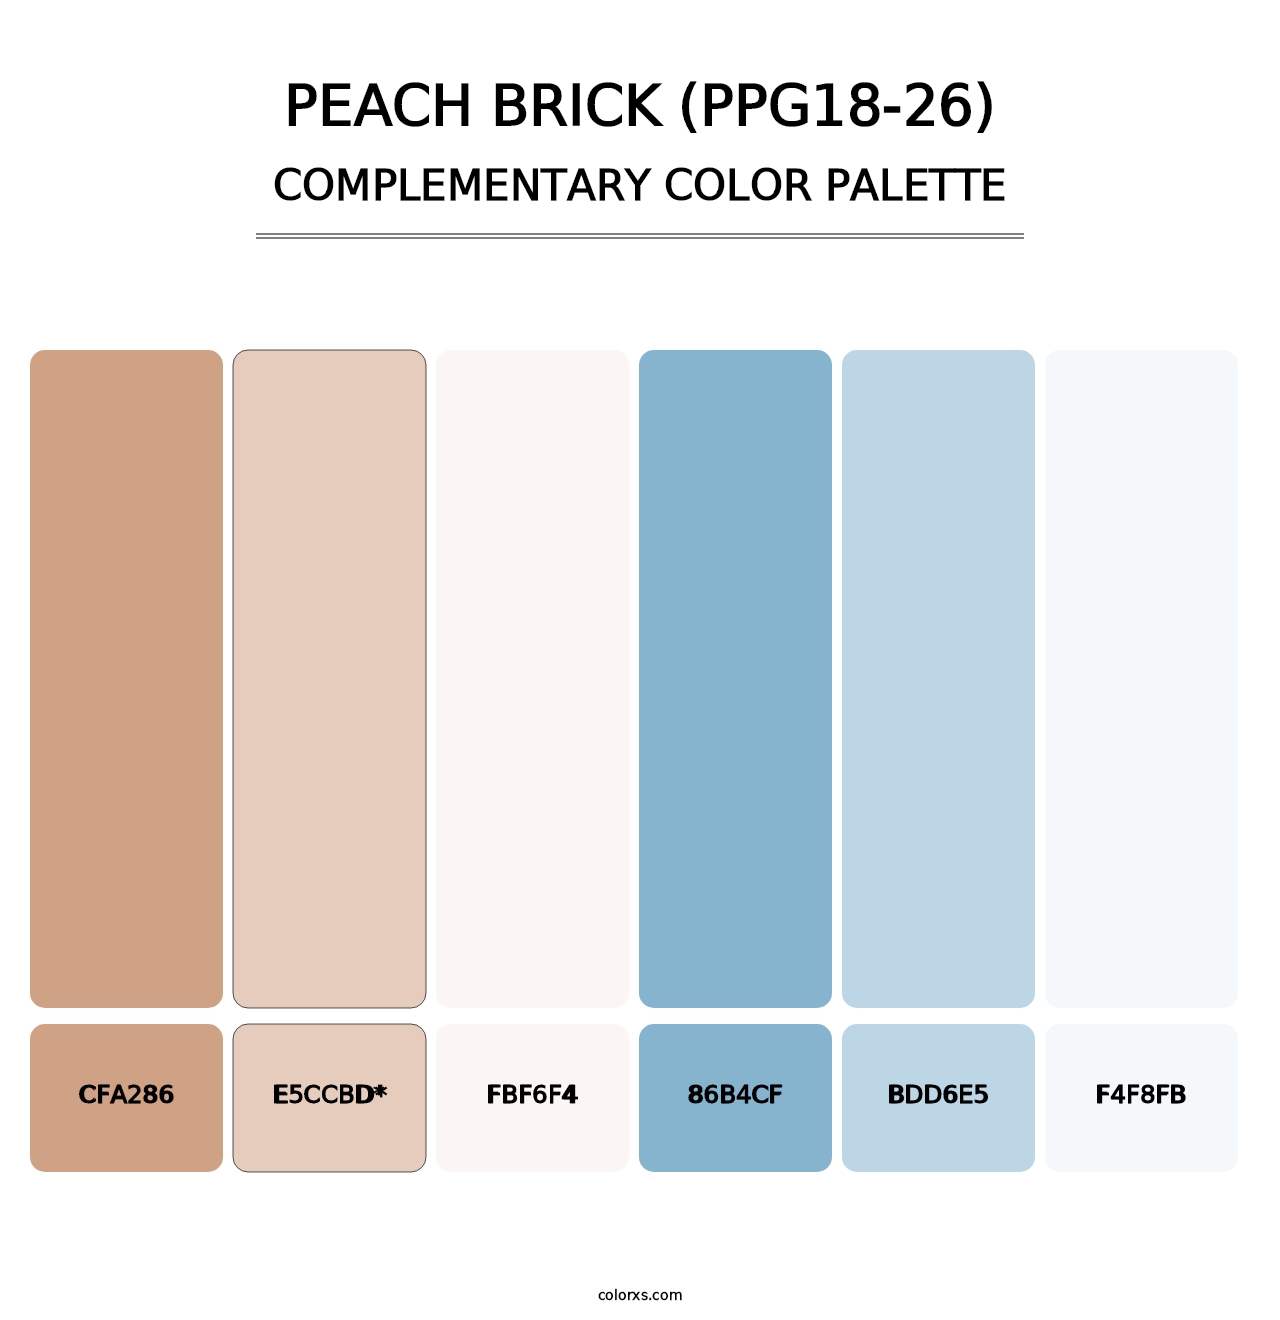 Peach Brick (PPG18-26) - Complementary Color Palette